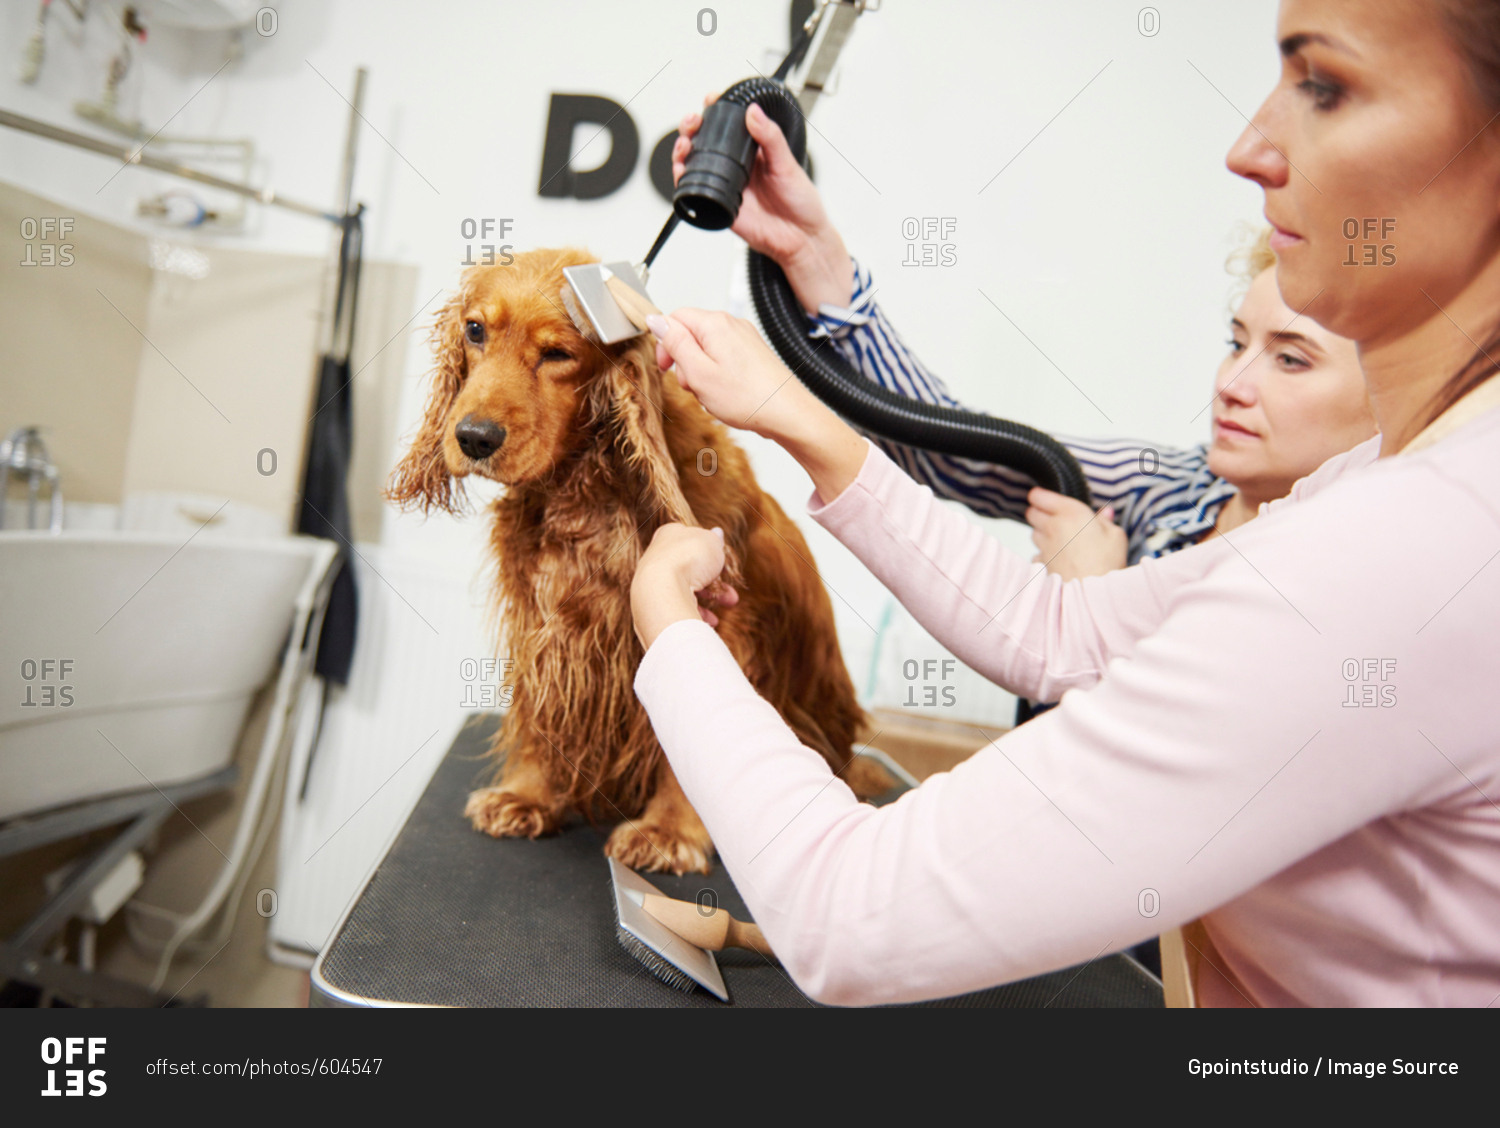 Female groomers blow drying cocker spaniel at dog grooming salon